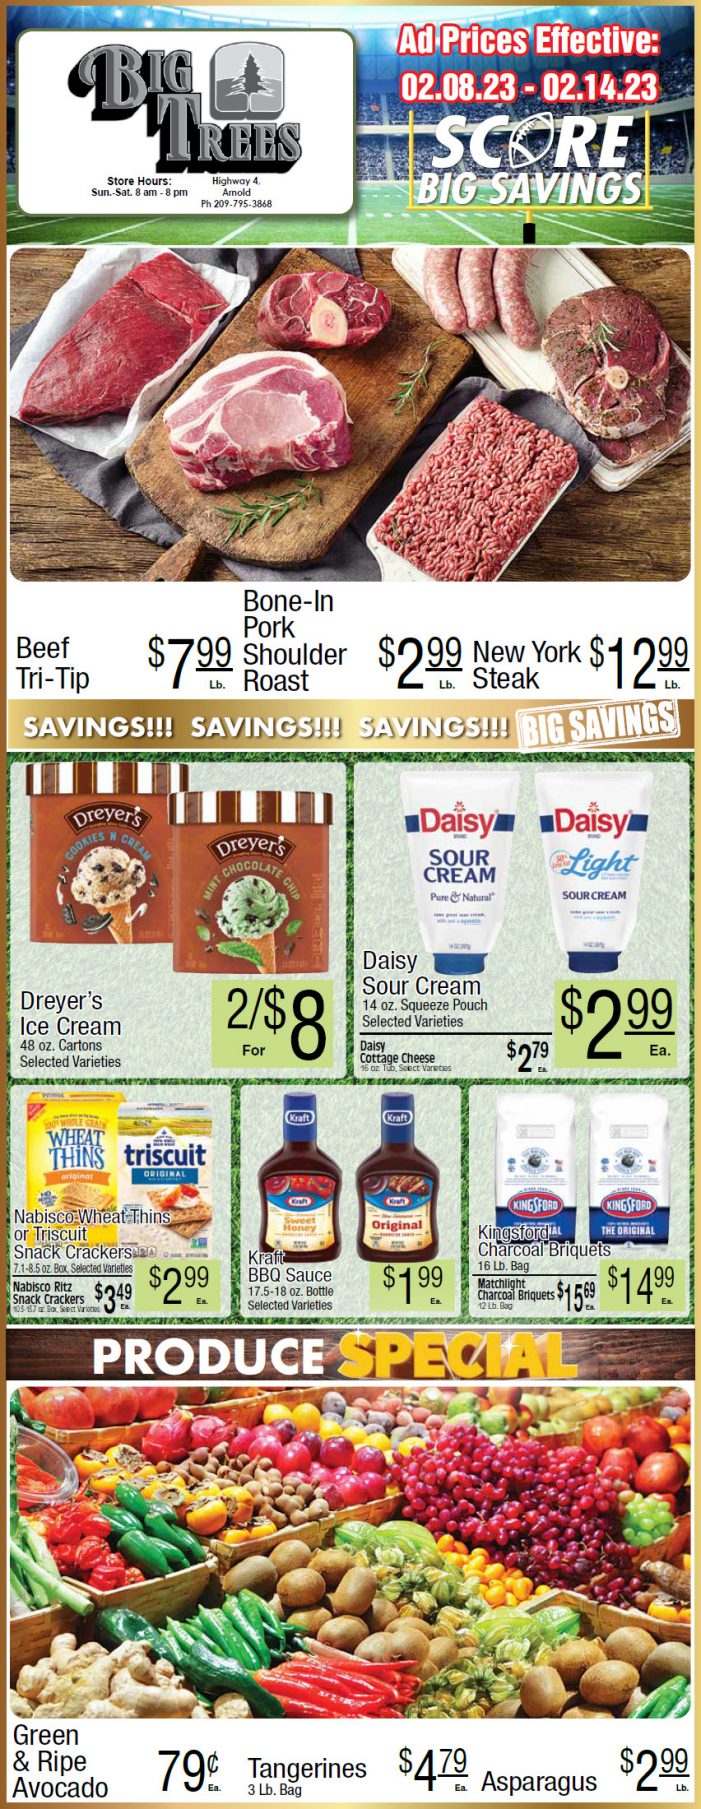 Big Trees Market Weekly Ad & Grocery Specials February 8 – 14th!  Shop Local & Save!!